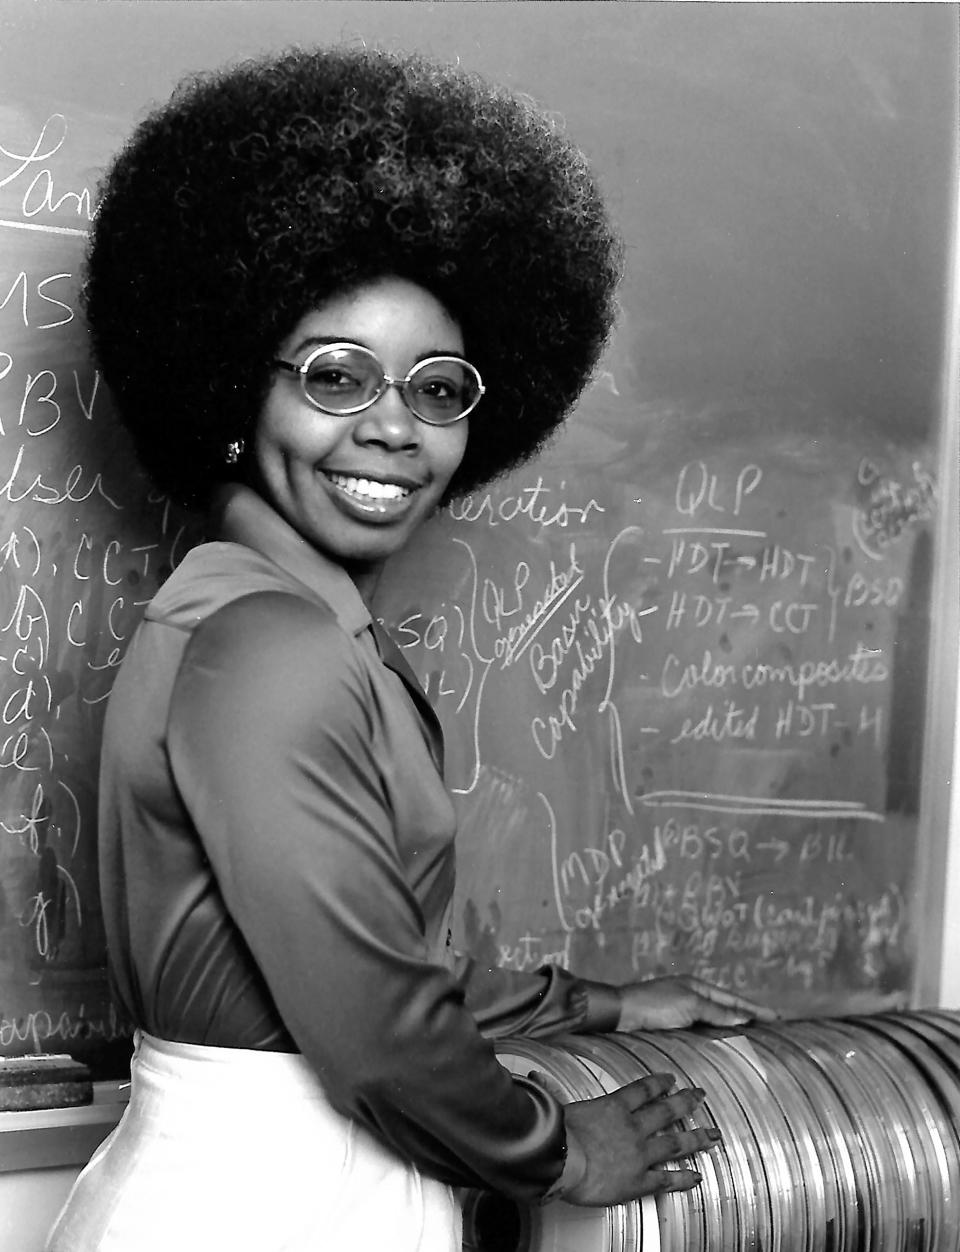 In this black and white photo, Valerie Thomas wears glasses and light pants while standing in front of a chalkboard.